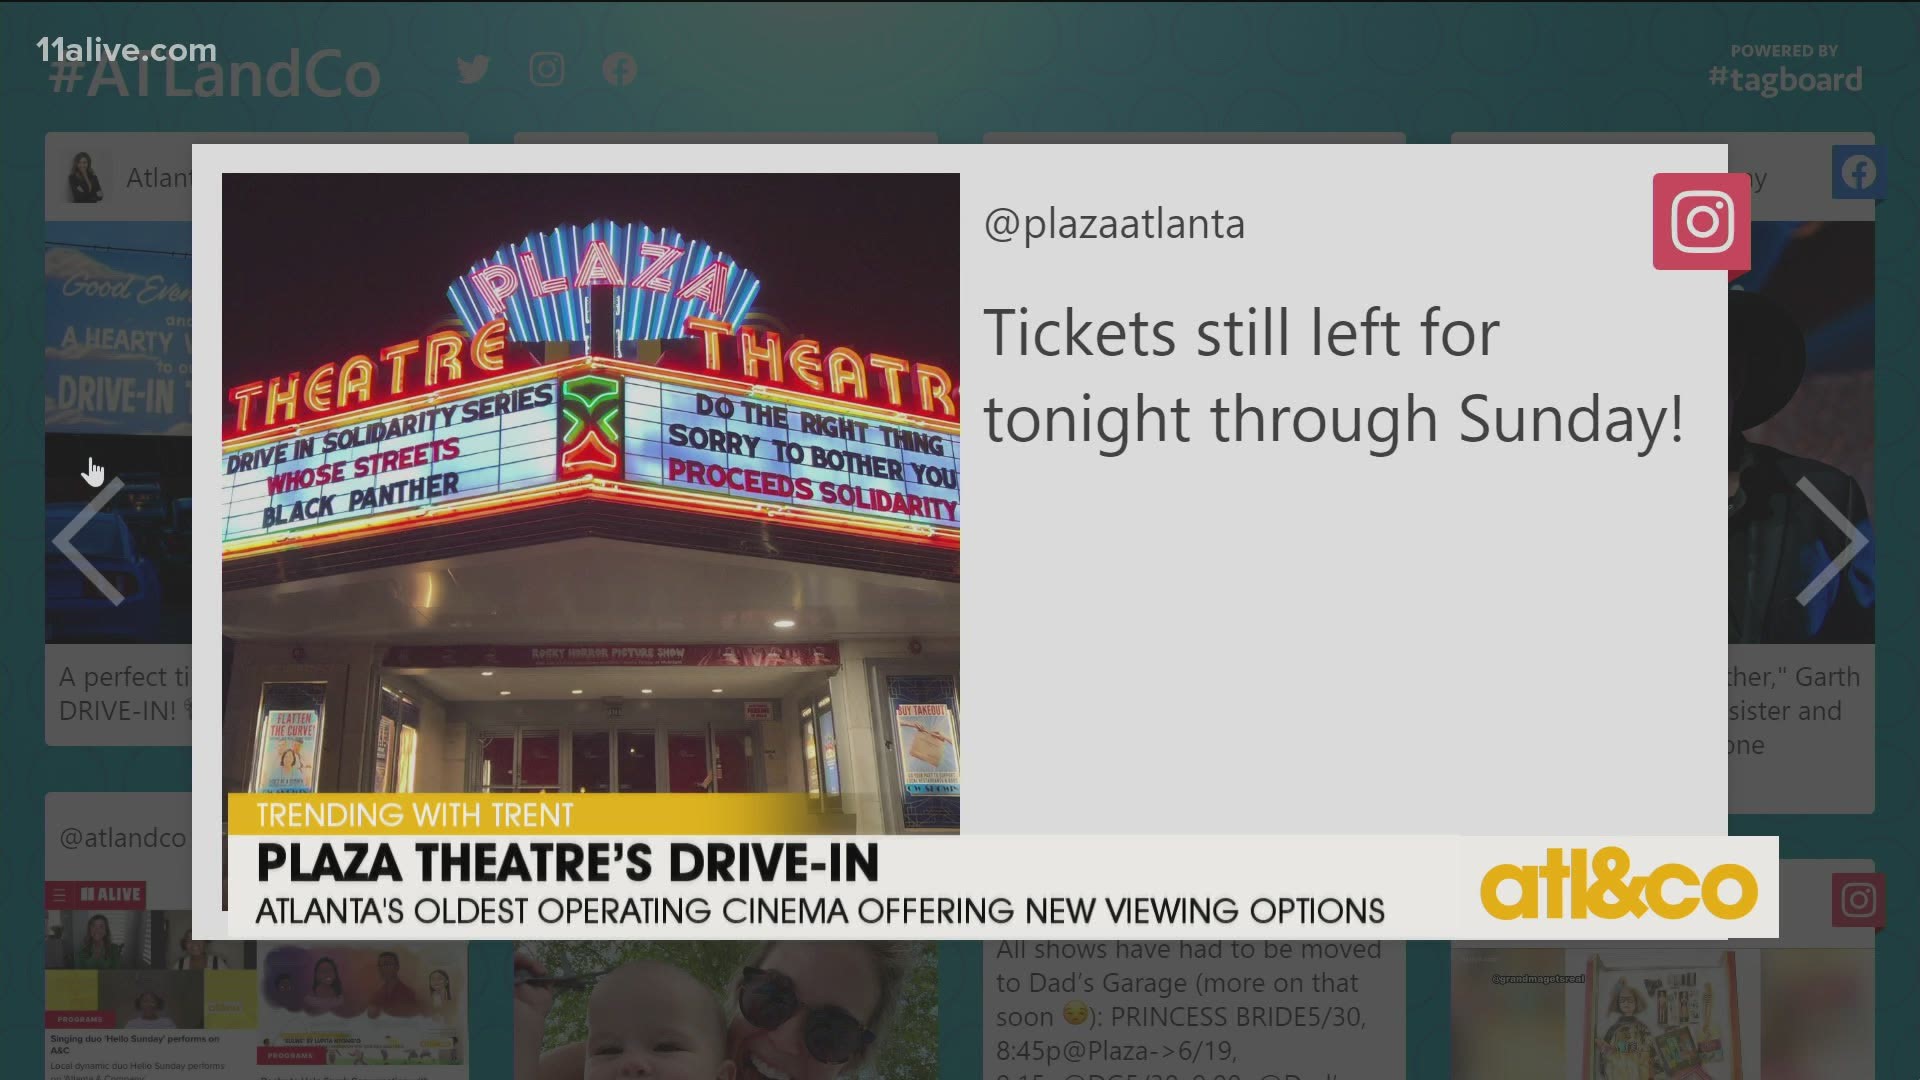 Check out these drive-in features at Atlanta's oldest operating cinema -- The Plaza Theatre! See what's Trending with Trent on 'Atlanta & Company'